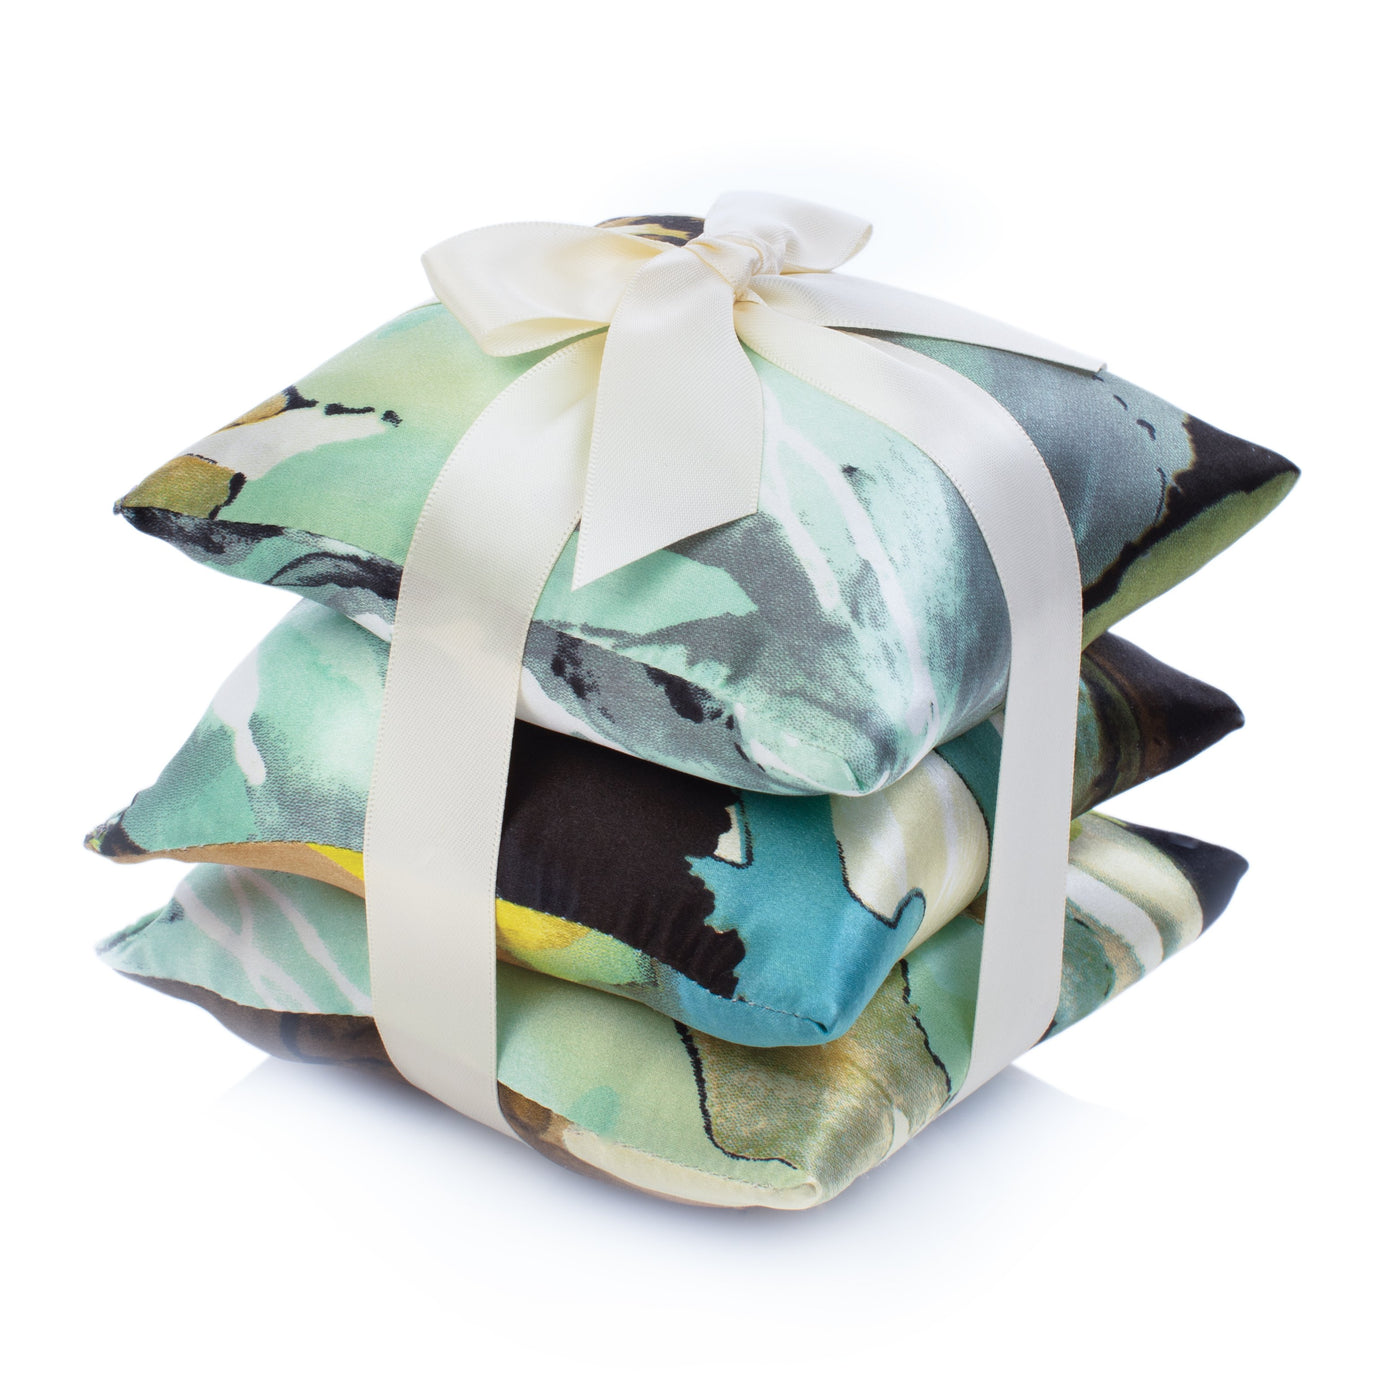 ELIZABETH W SILK SACHETS - SET OF 3 (Available in 8 Designs)